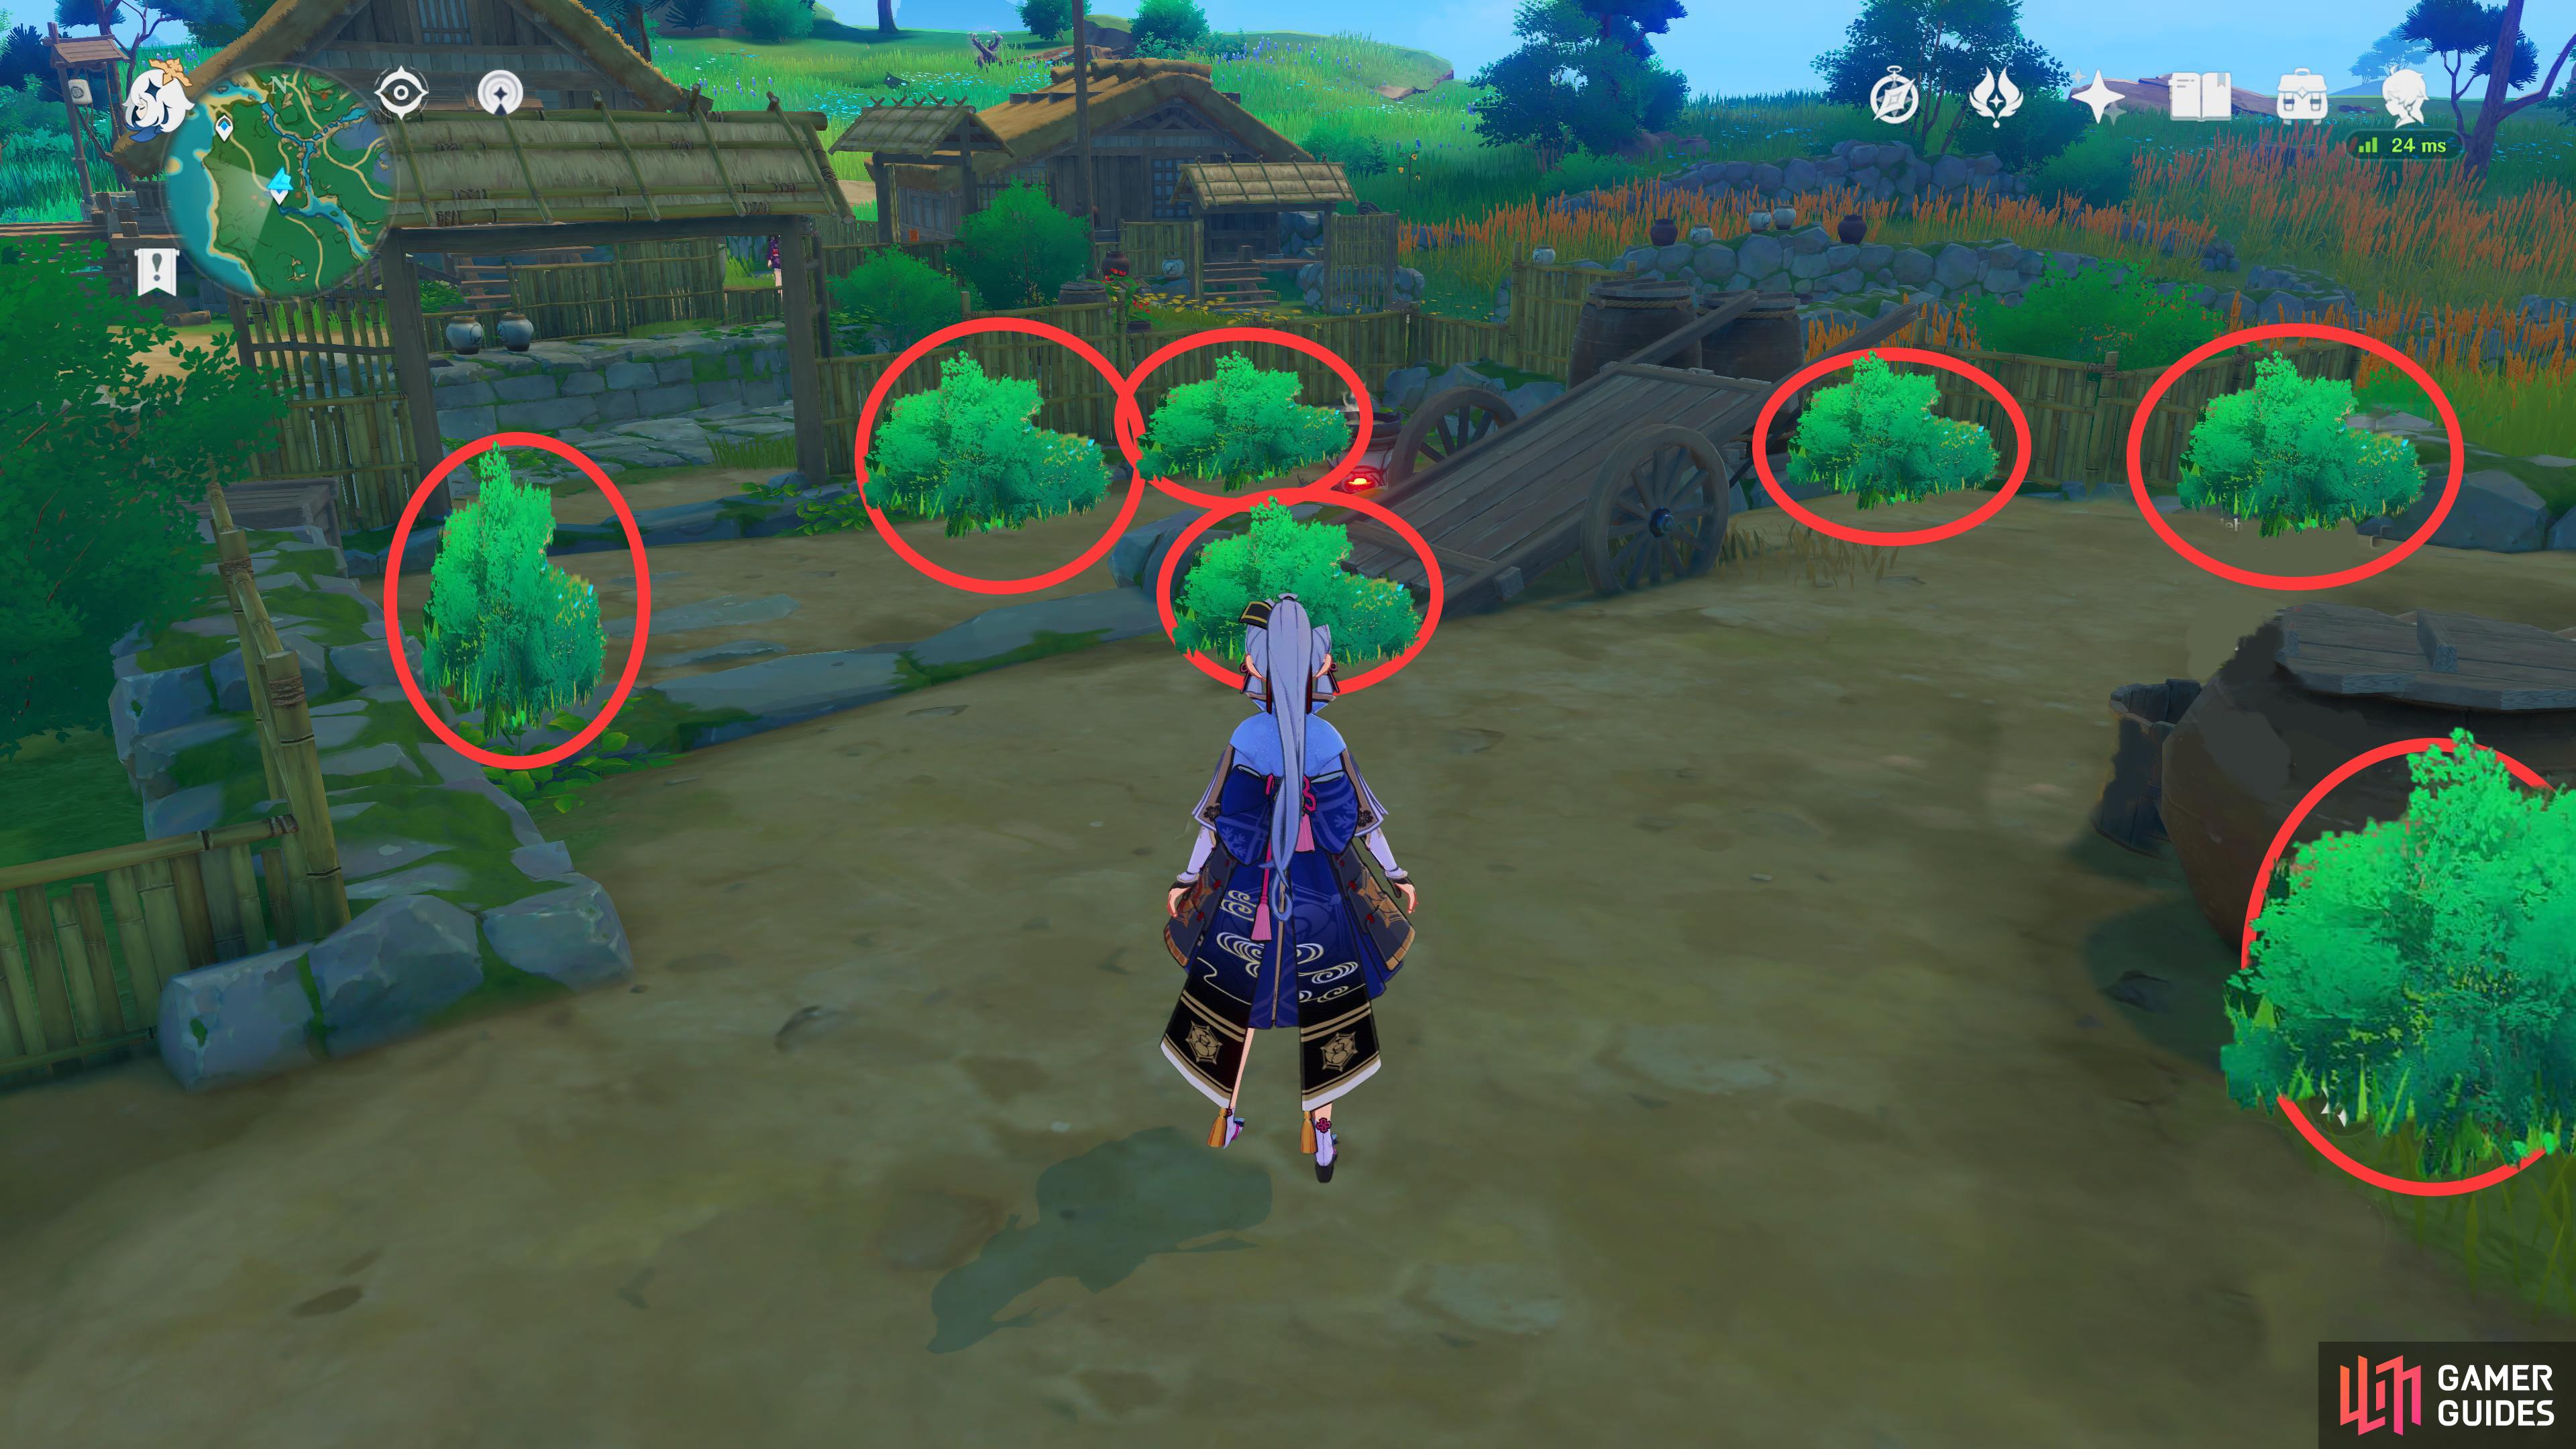 There are seven bushes to attack to clear the weeds, all these can be found outside the Imatanis house.